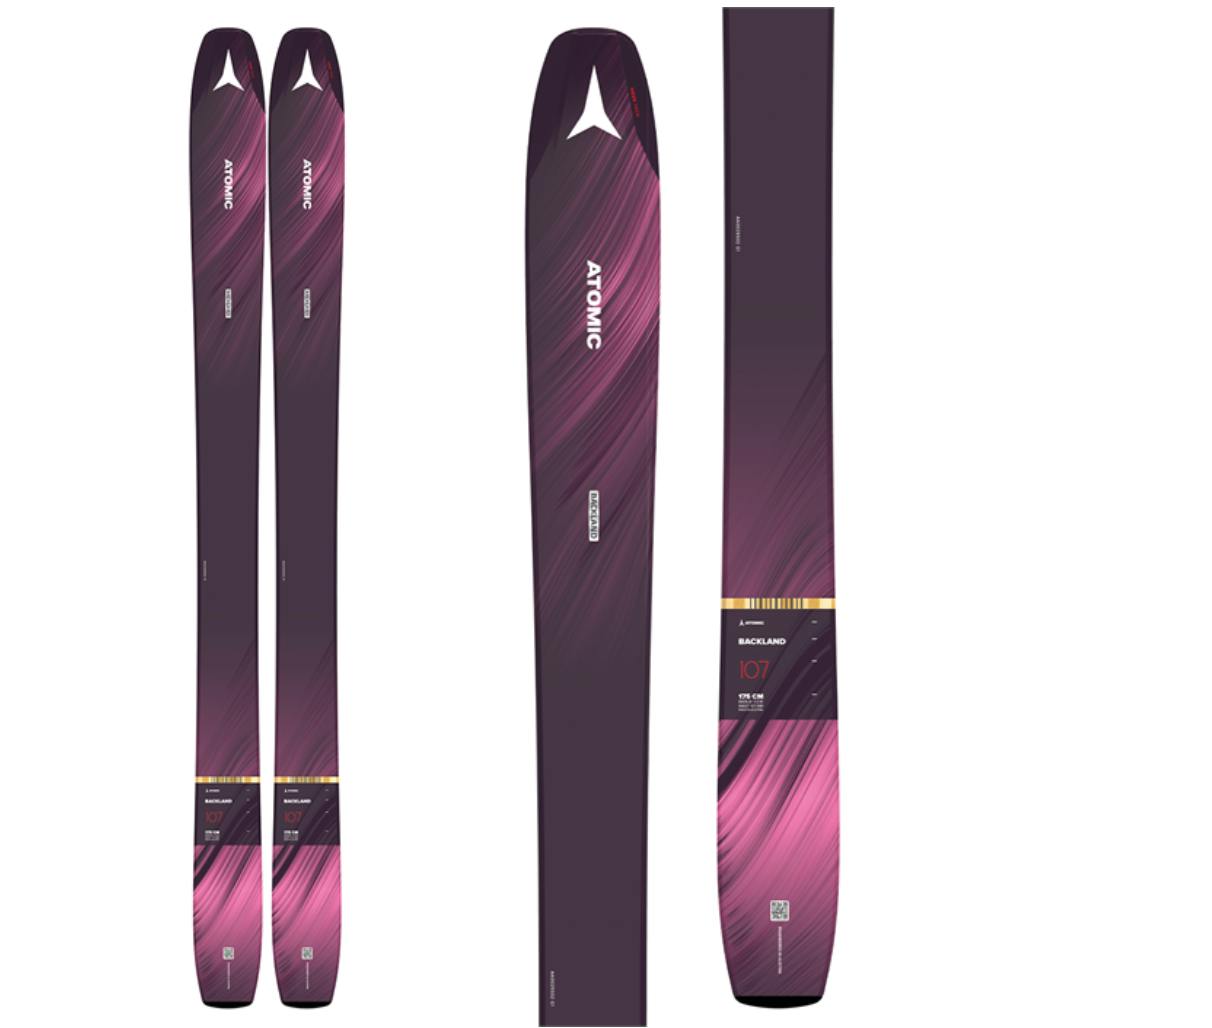 The Atomic Backland 107 Women’s Skis.